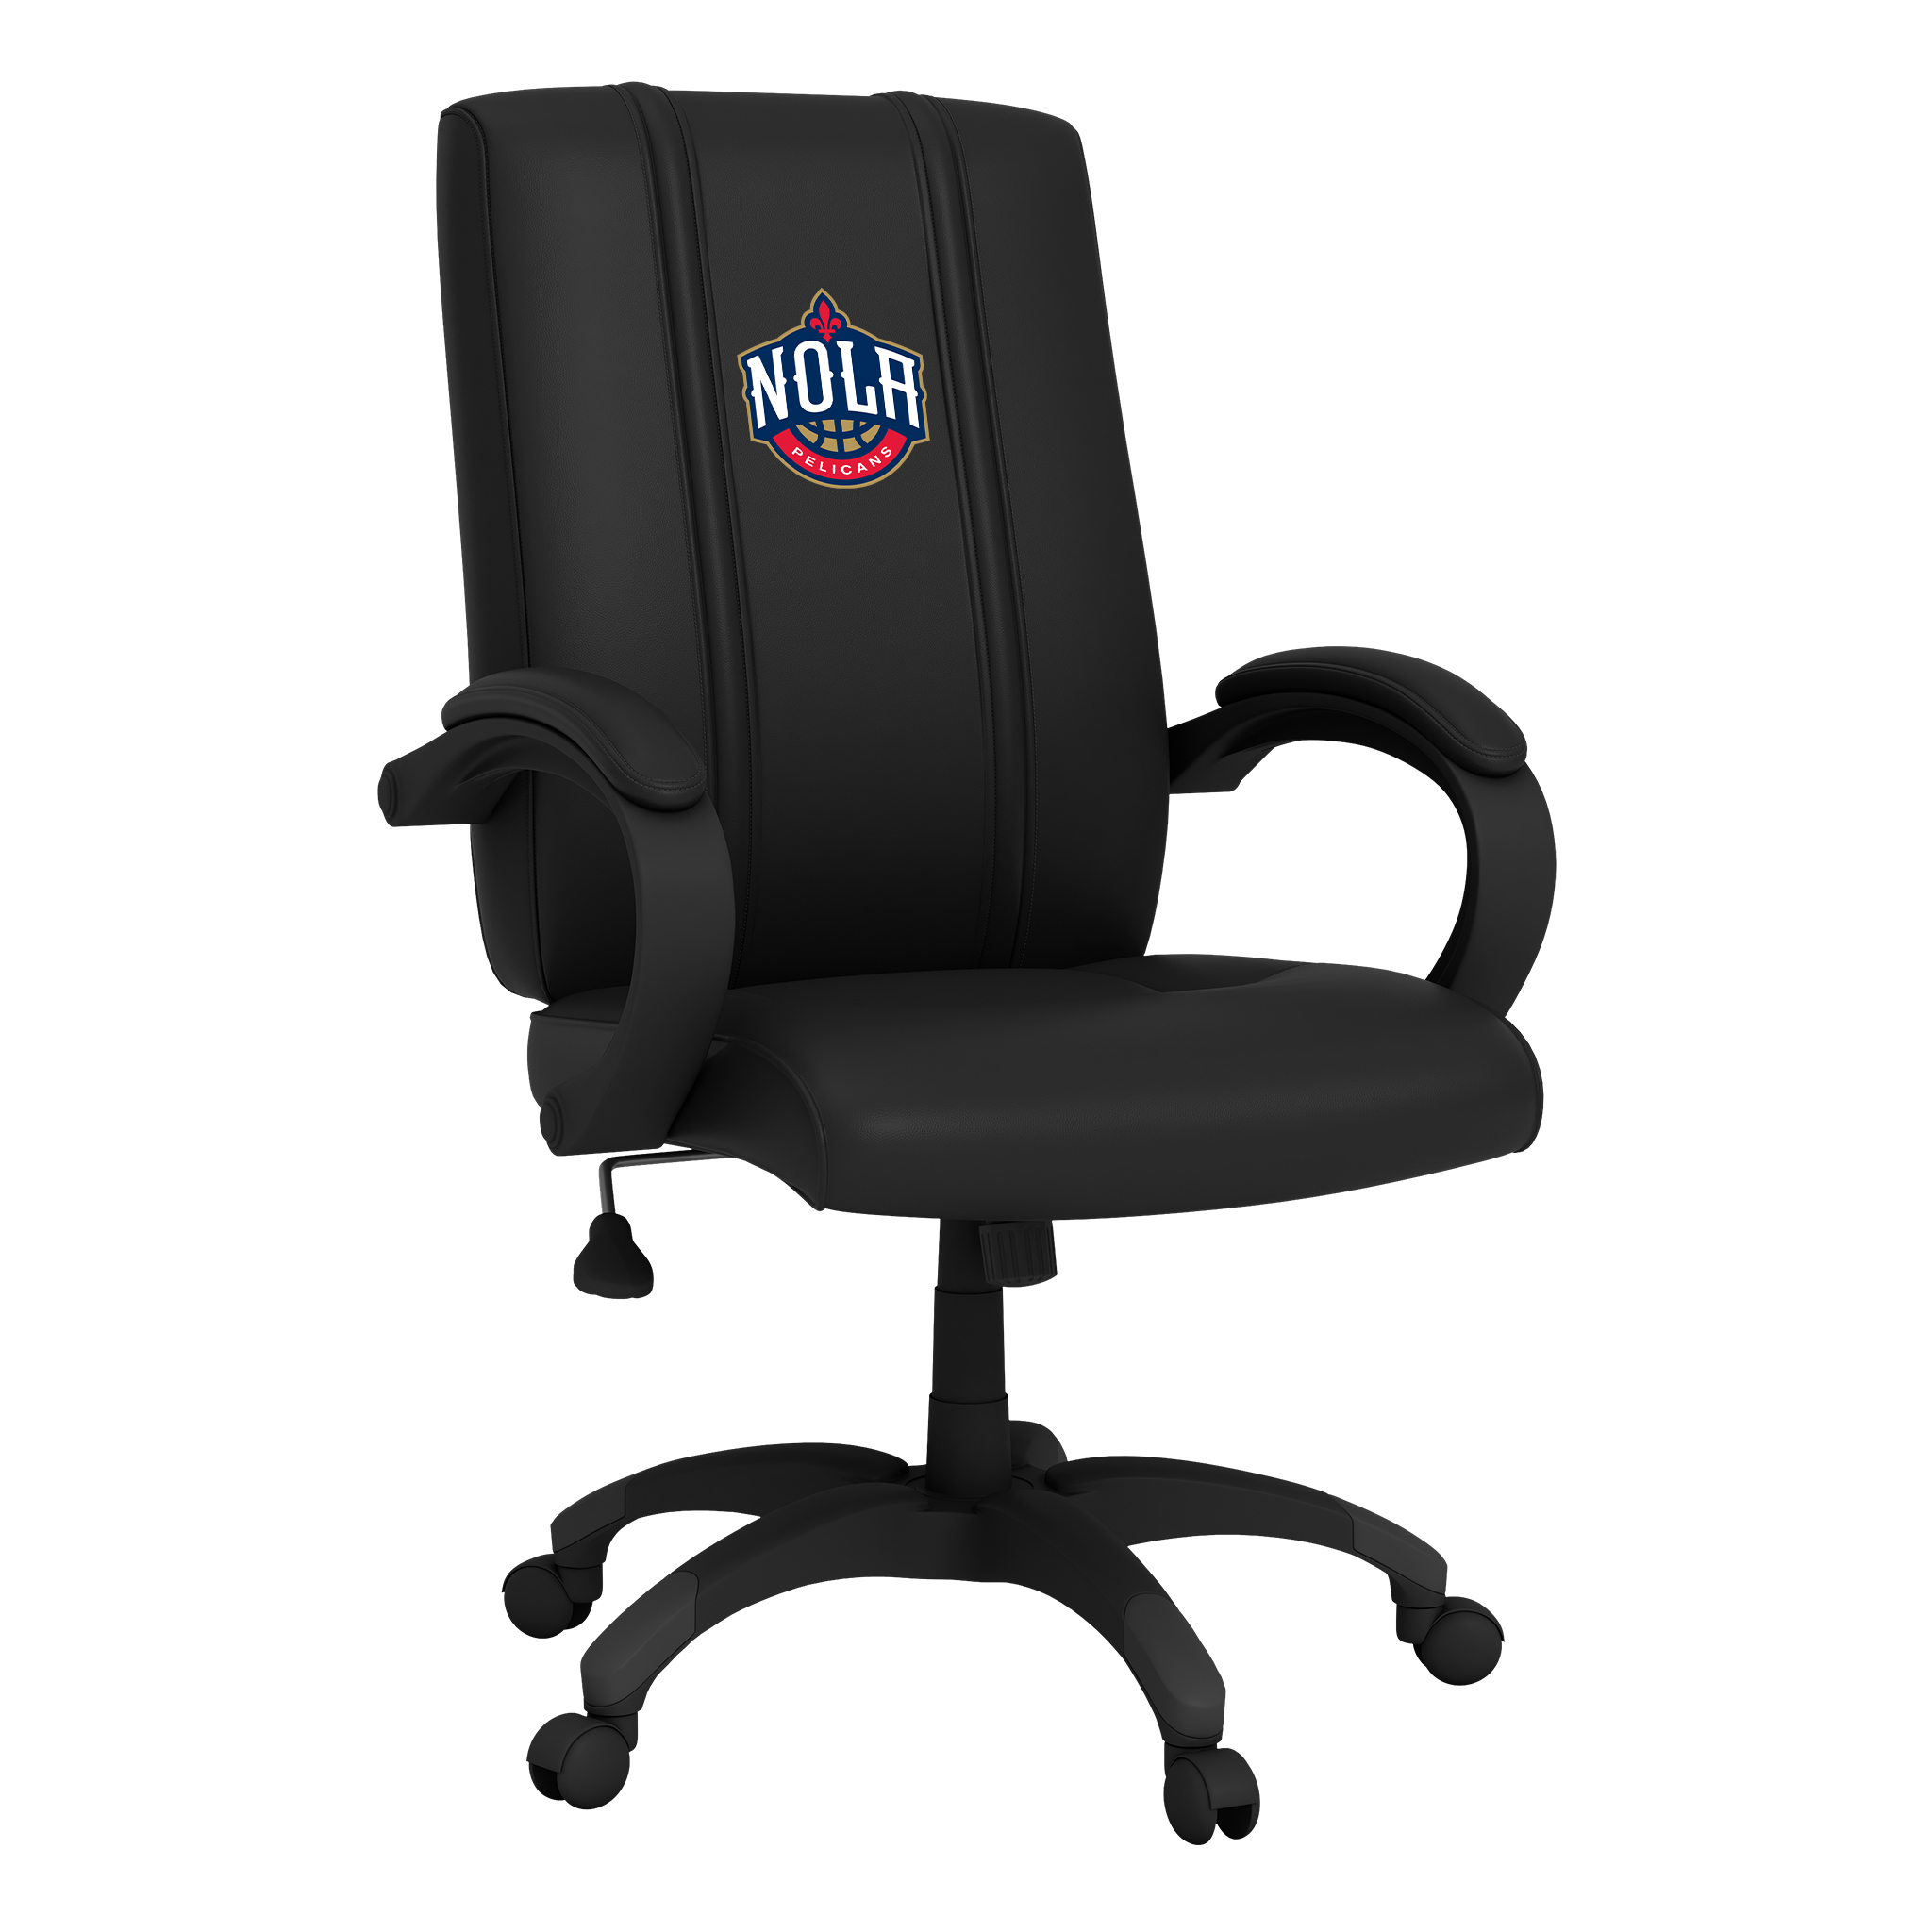 New Orleans Pelicans Office Chair 1000 with New Orleans Pelicans NOLA